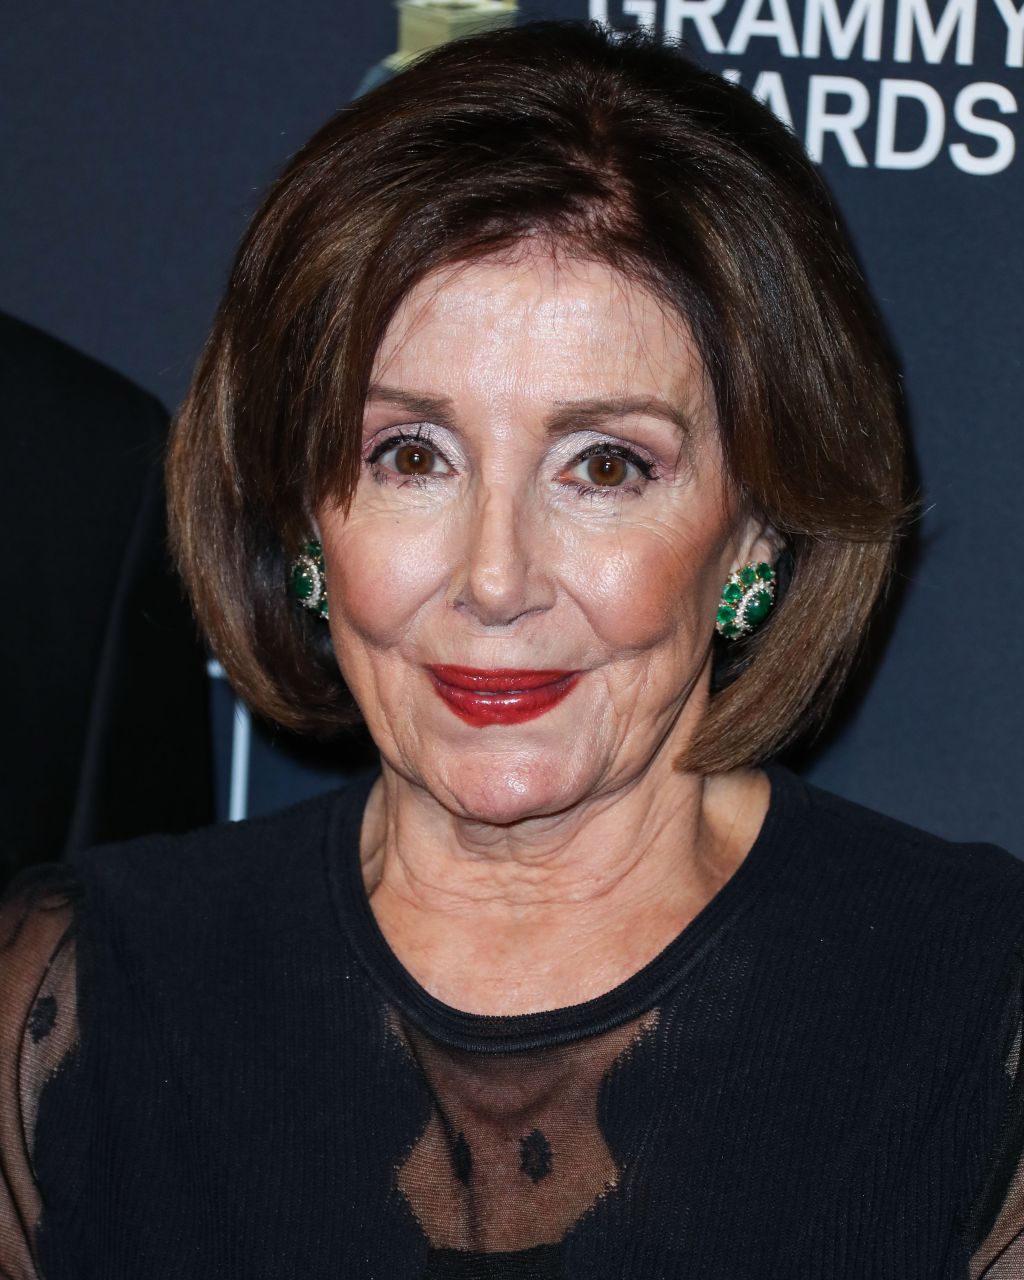 Nancy Pelosi arrives at The Recording Academy And Clive Davis&apos; 2020 Pre-GRAMMY Gala held at The Beverly Hilton Hotel on January 25, 2020 in Beverly Hills, Los Angeles, California, United States.